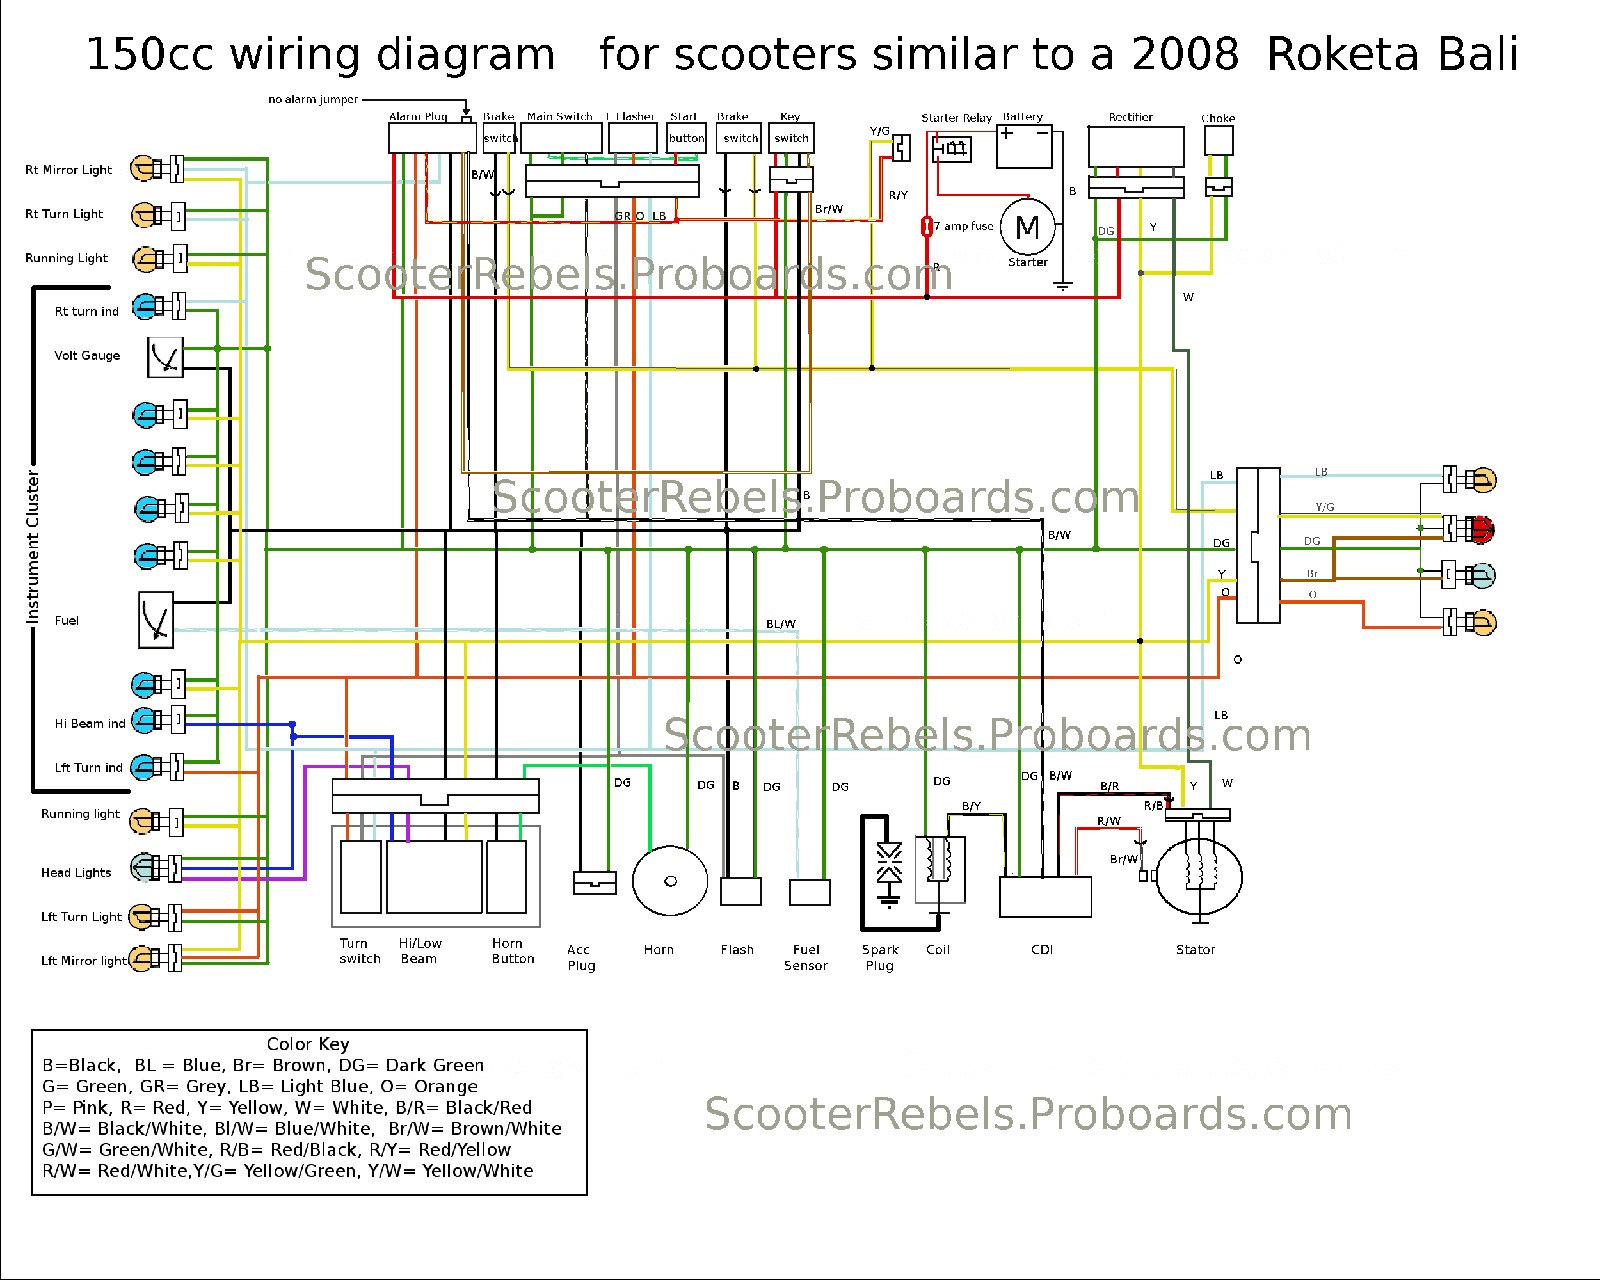 150cc chinese scooter wiring diagram Collection Razor Electric Scooter Wiring Diagram Copy Chinese Scooter Club